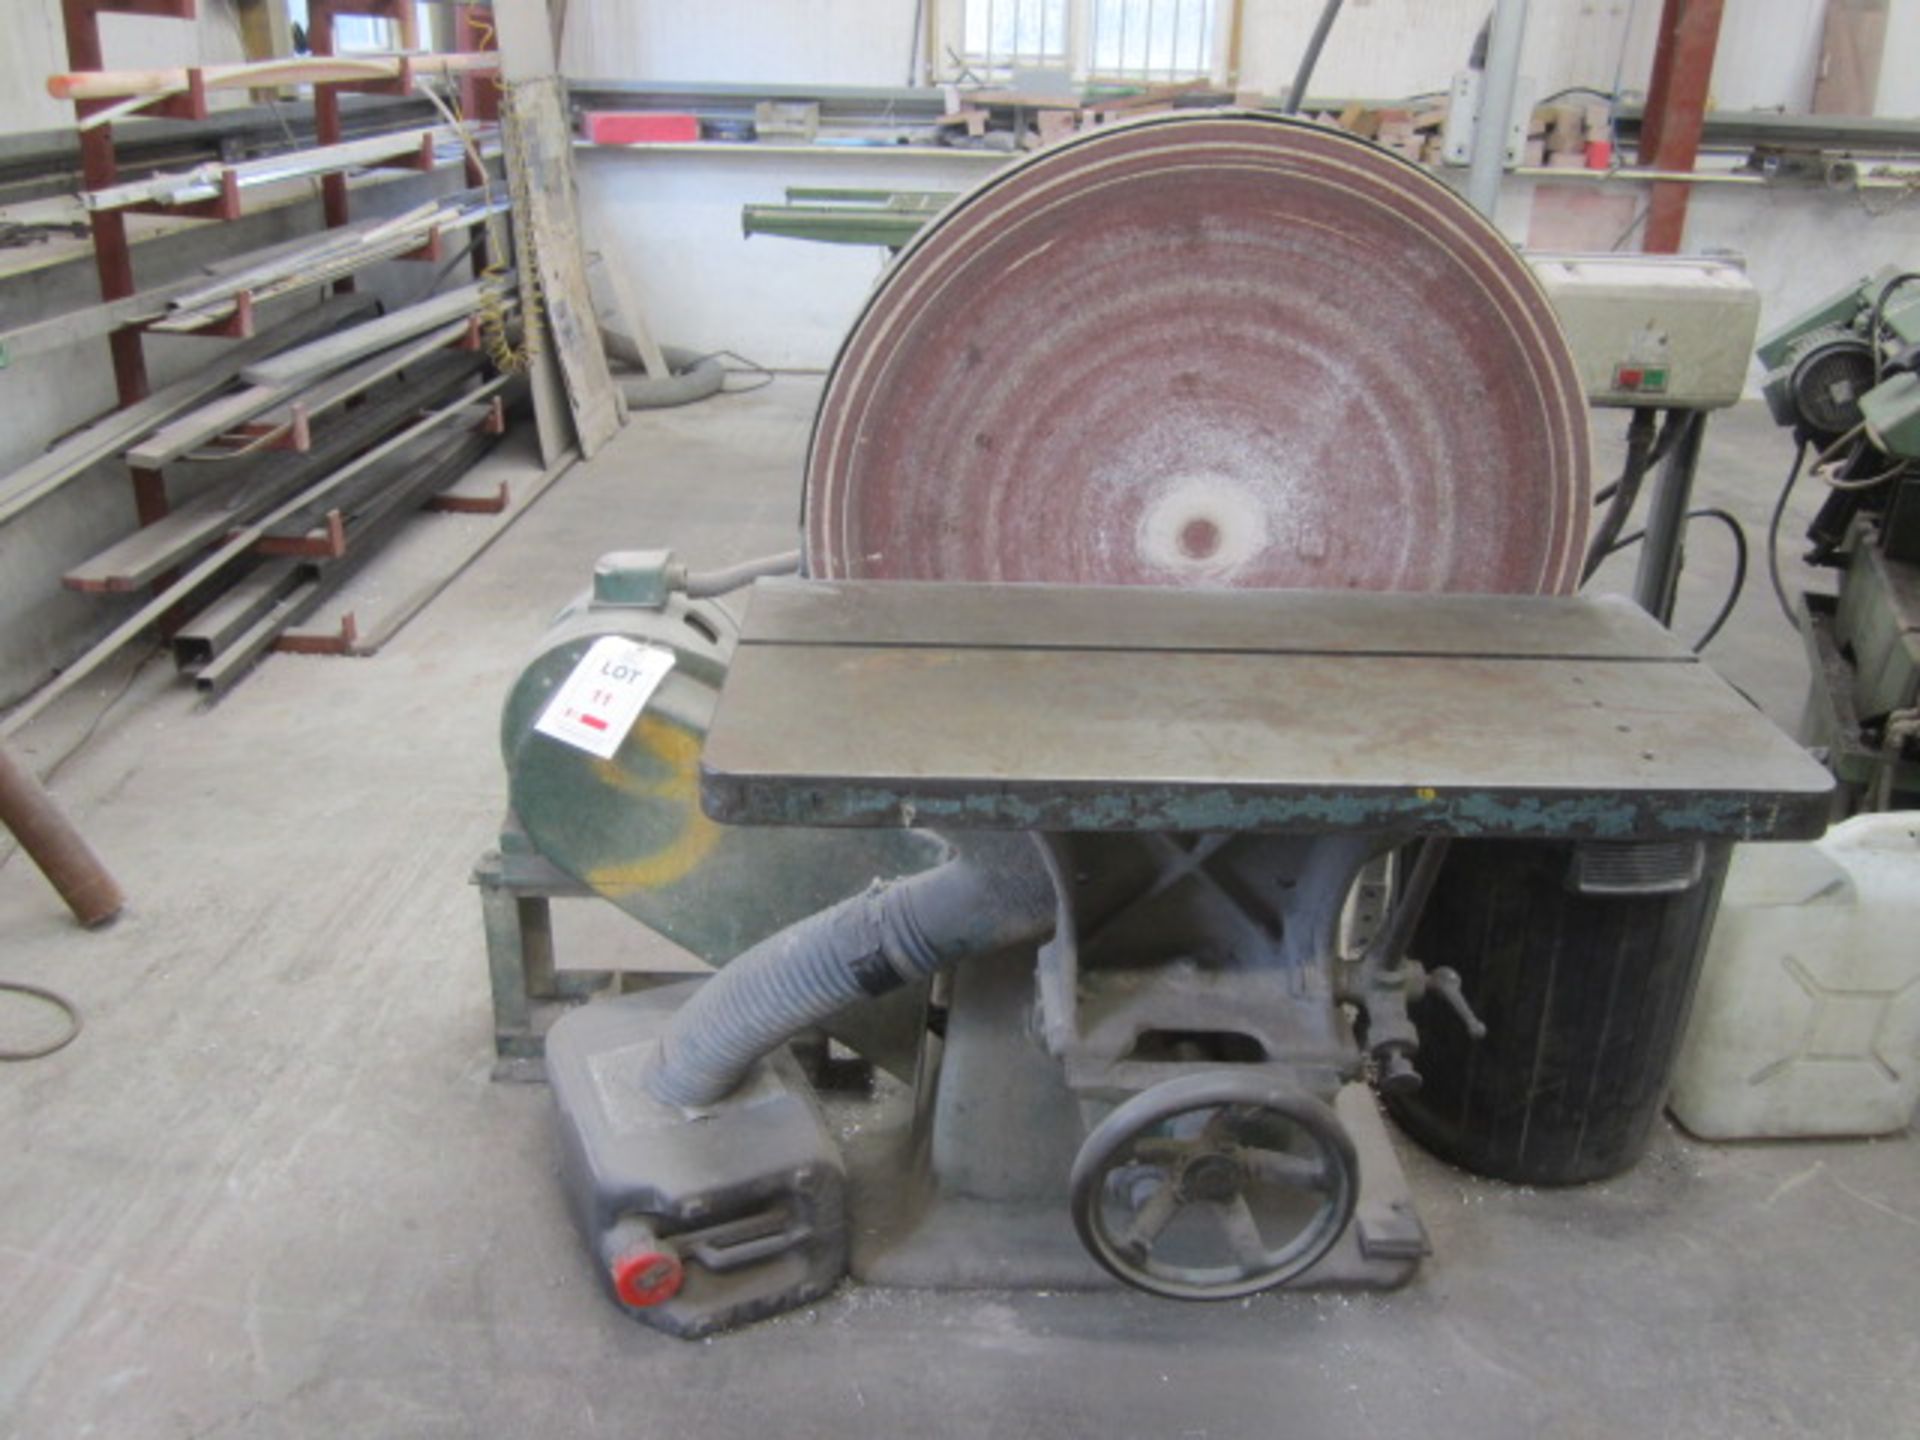 Wadkin 30" horizontal spindle disc sander, table size approx. 34" x 17". Located at Supreme